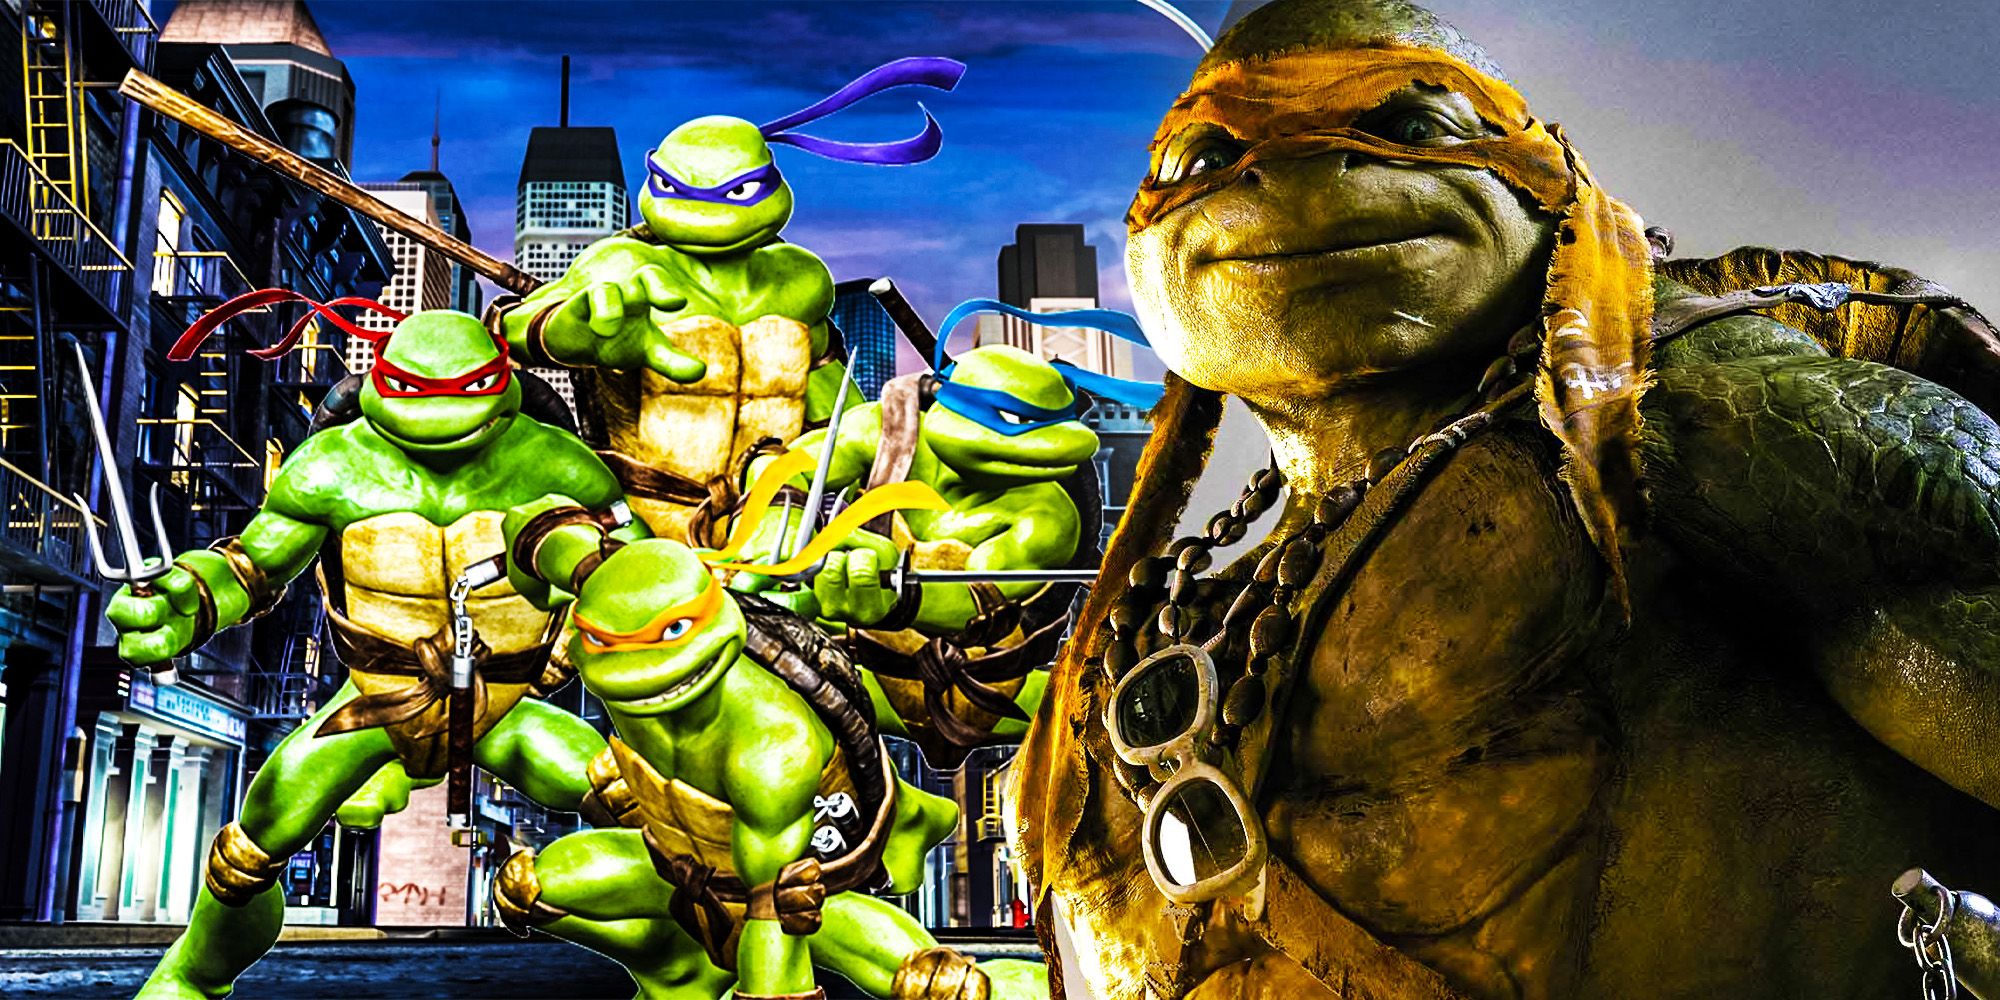 TMNT's 2007 Movie Proves Michael Bay's Turtles Franchise's Biggest Flaw